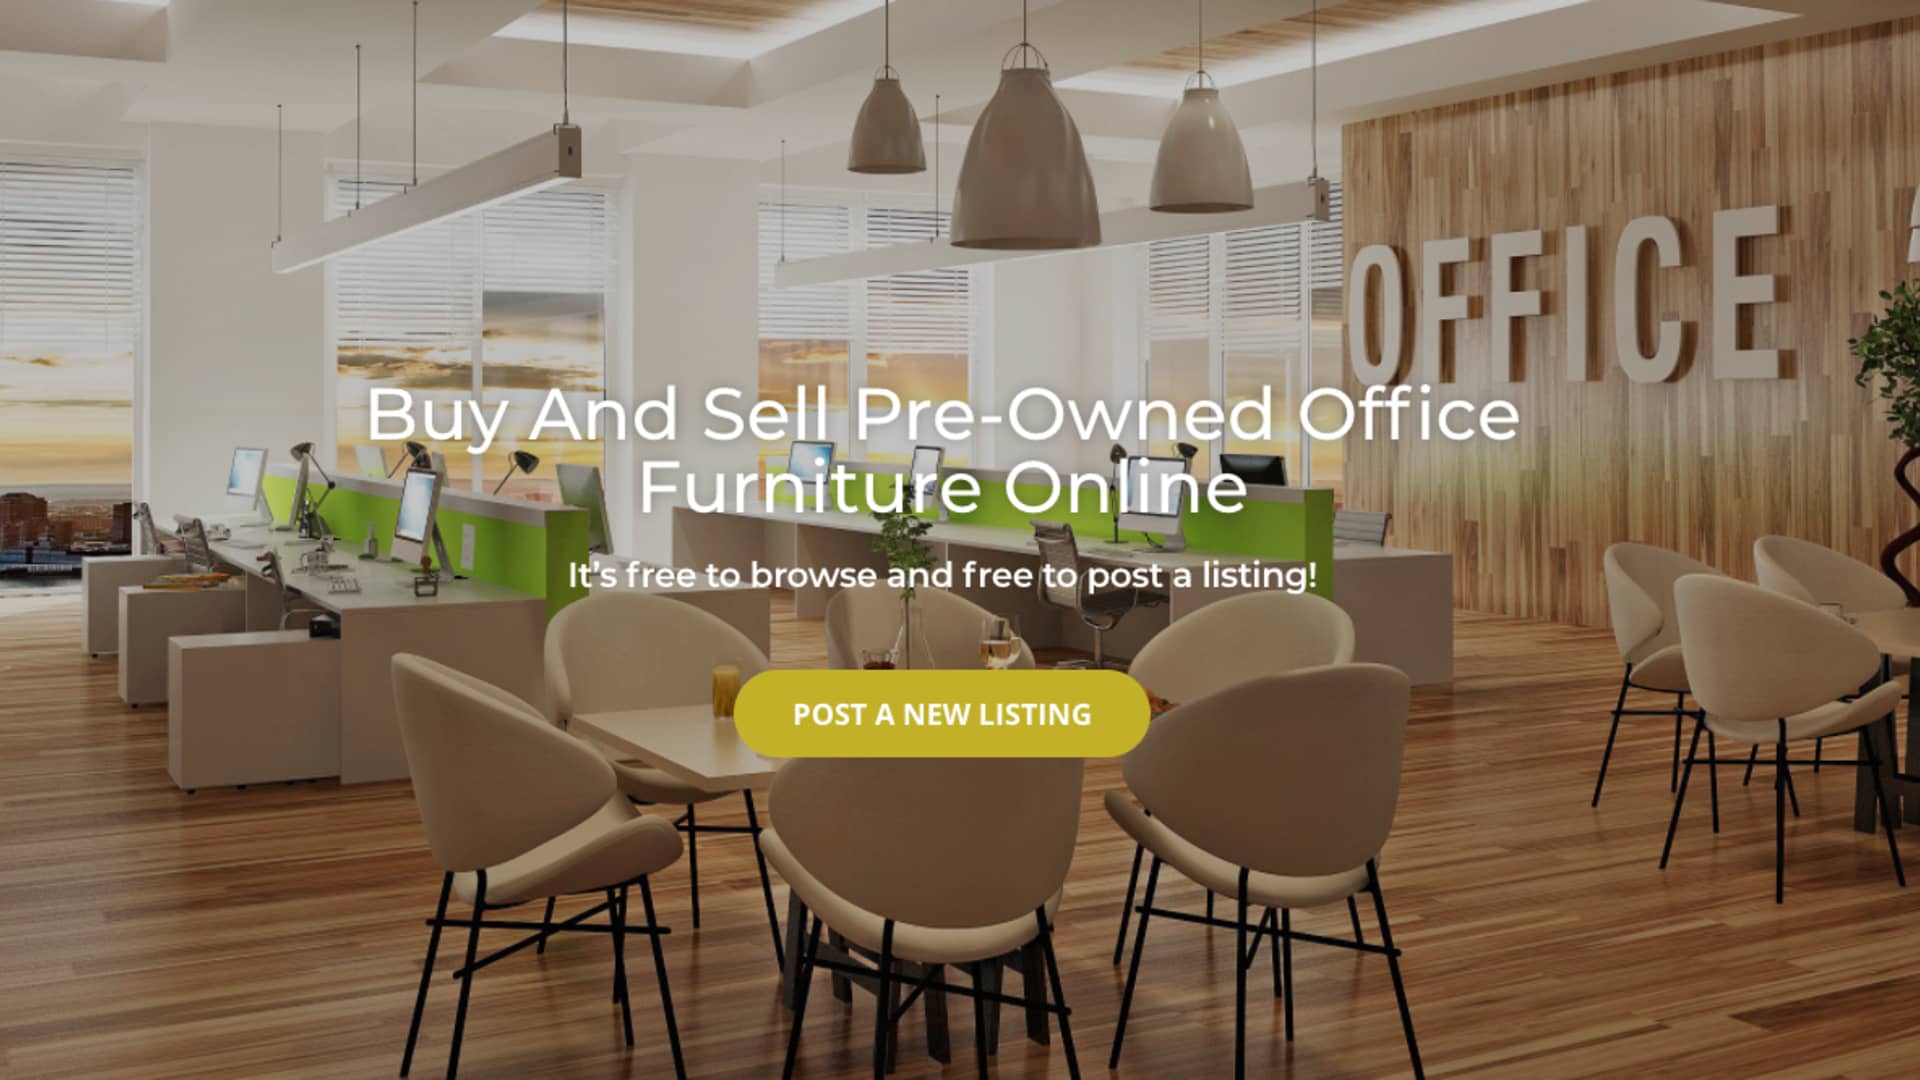 Clear Office website offers caters to companies and users in the market for pre-owned office furniture.